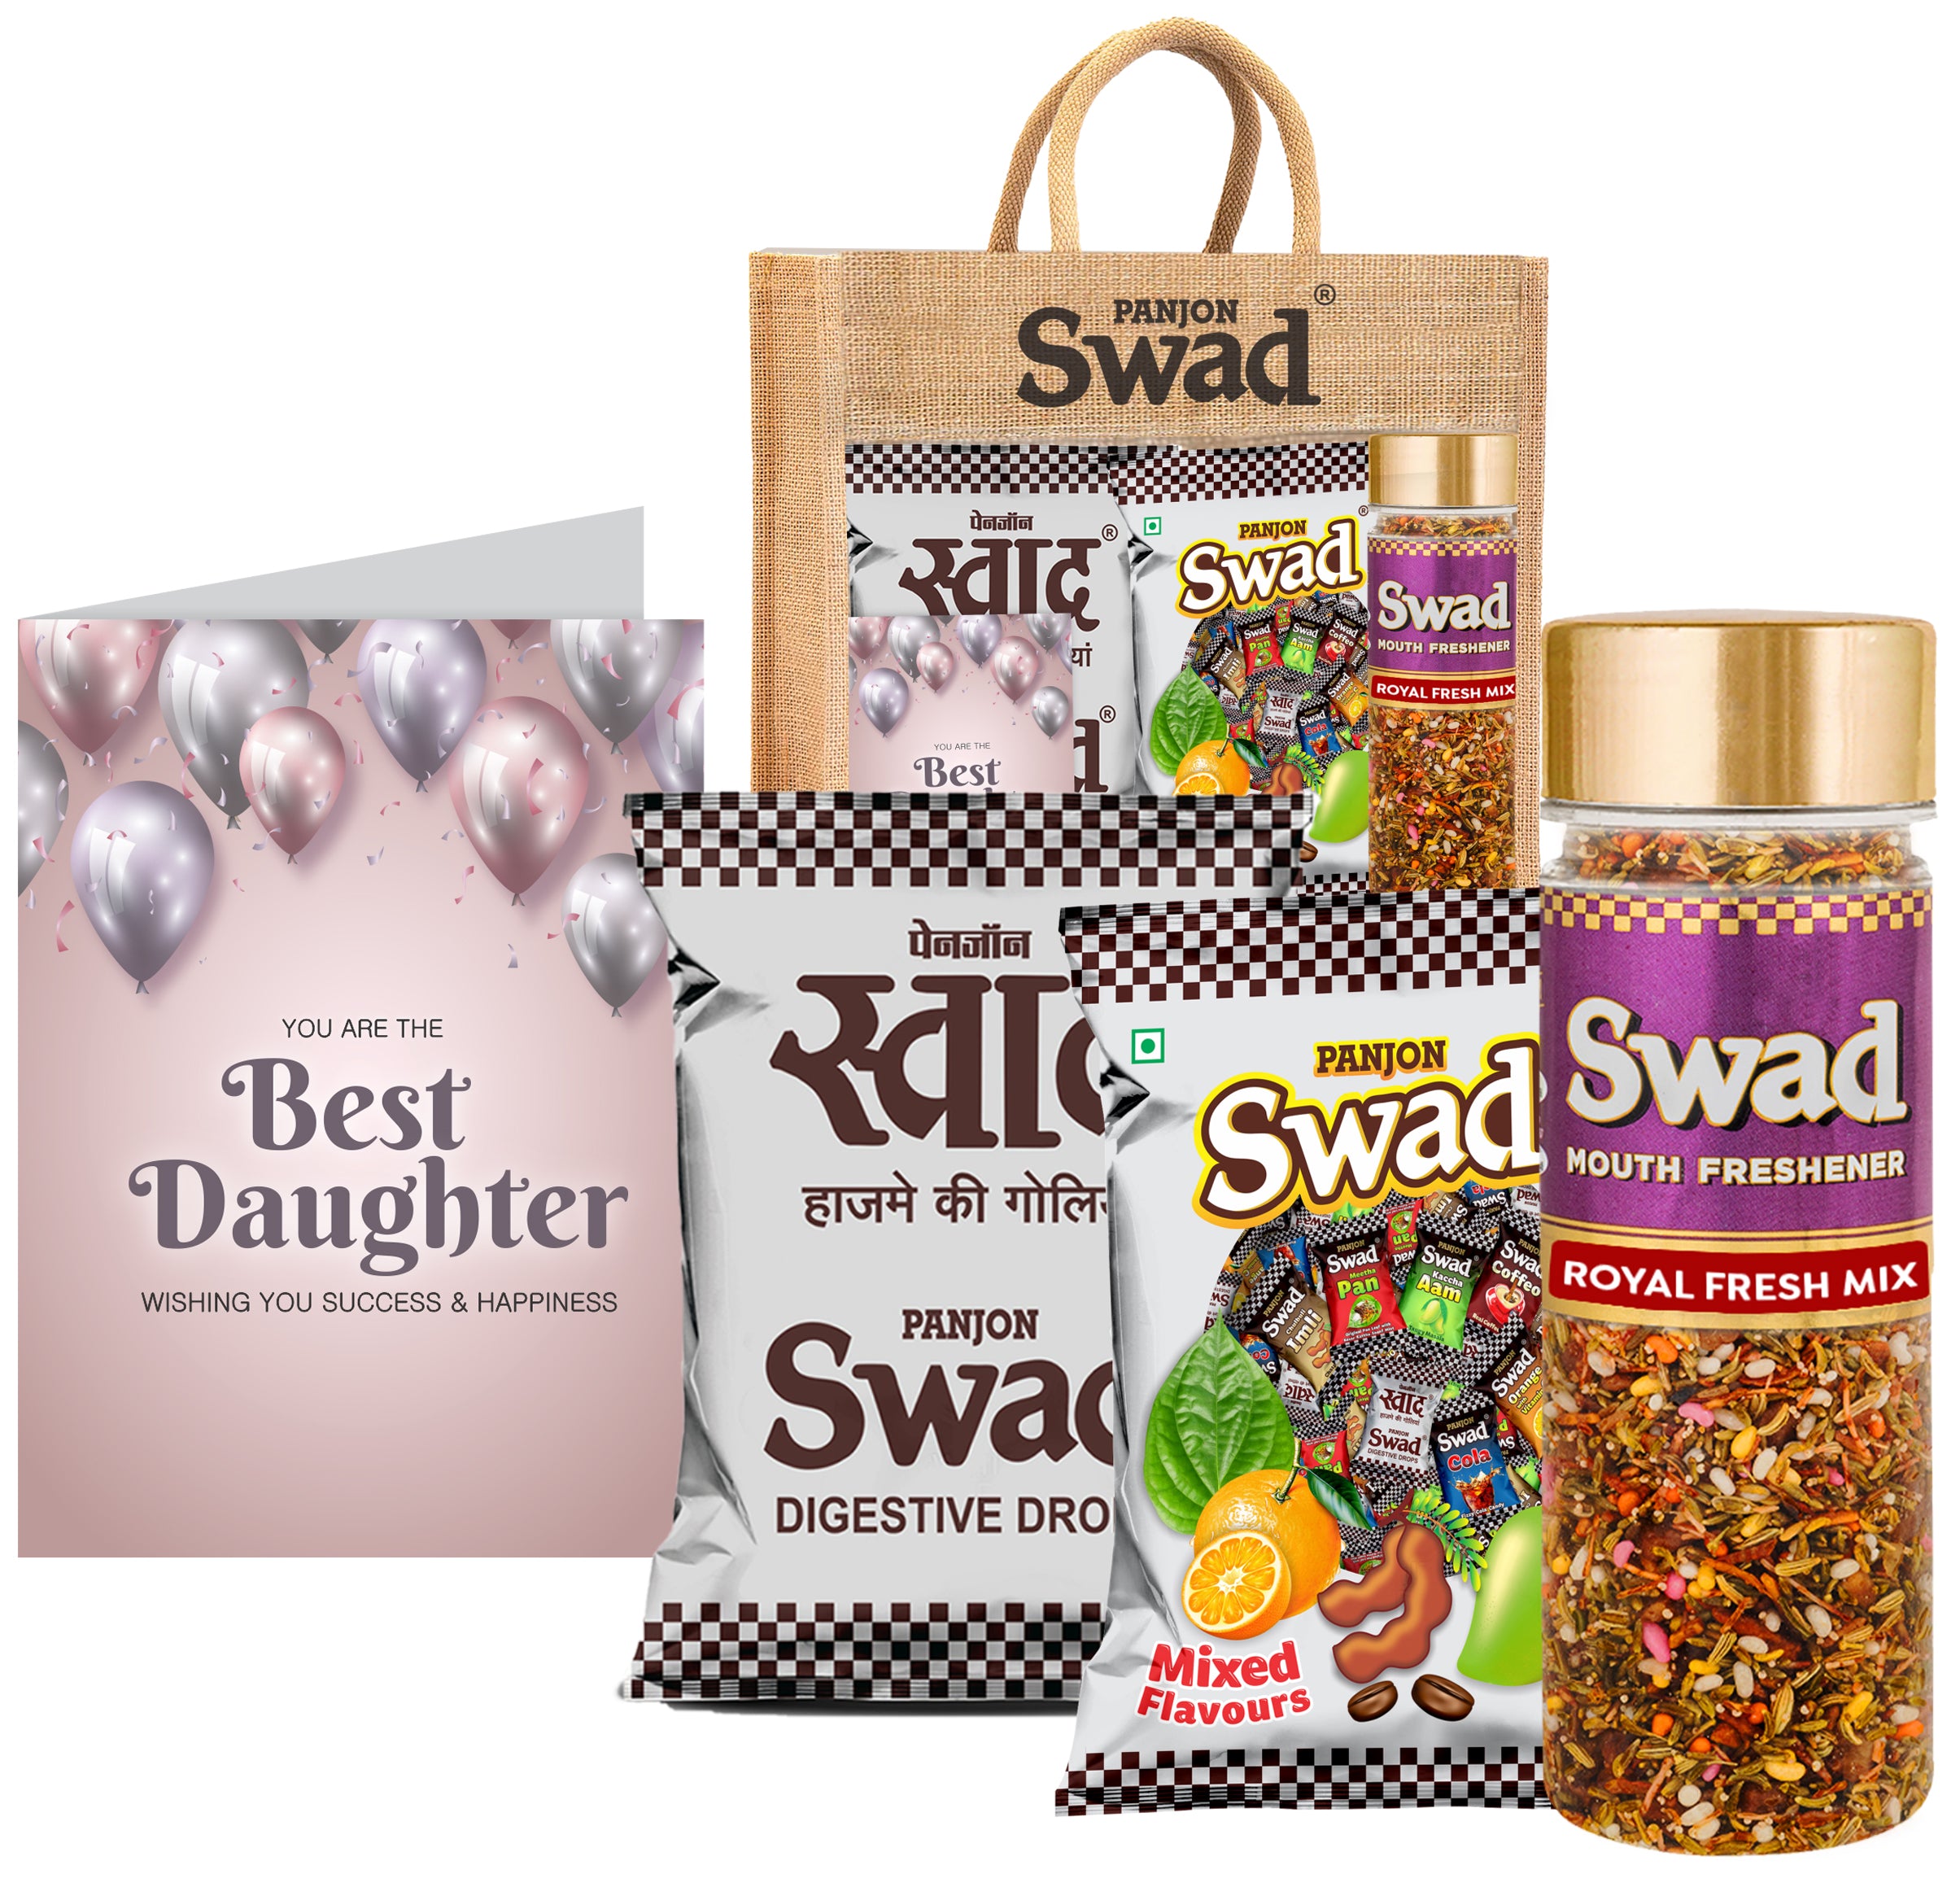 Swad Best Daughter Gift with Card (25 Swad Candy, 25 Mixed Toffee, Royal Fresh Mix Mukhwas) in Jute Bag